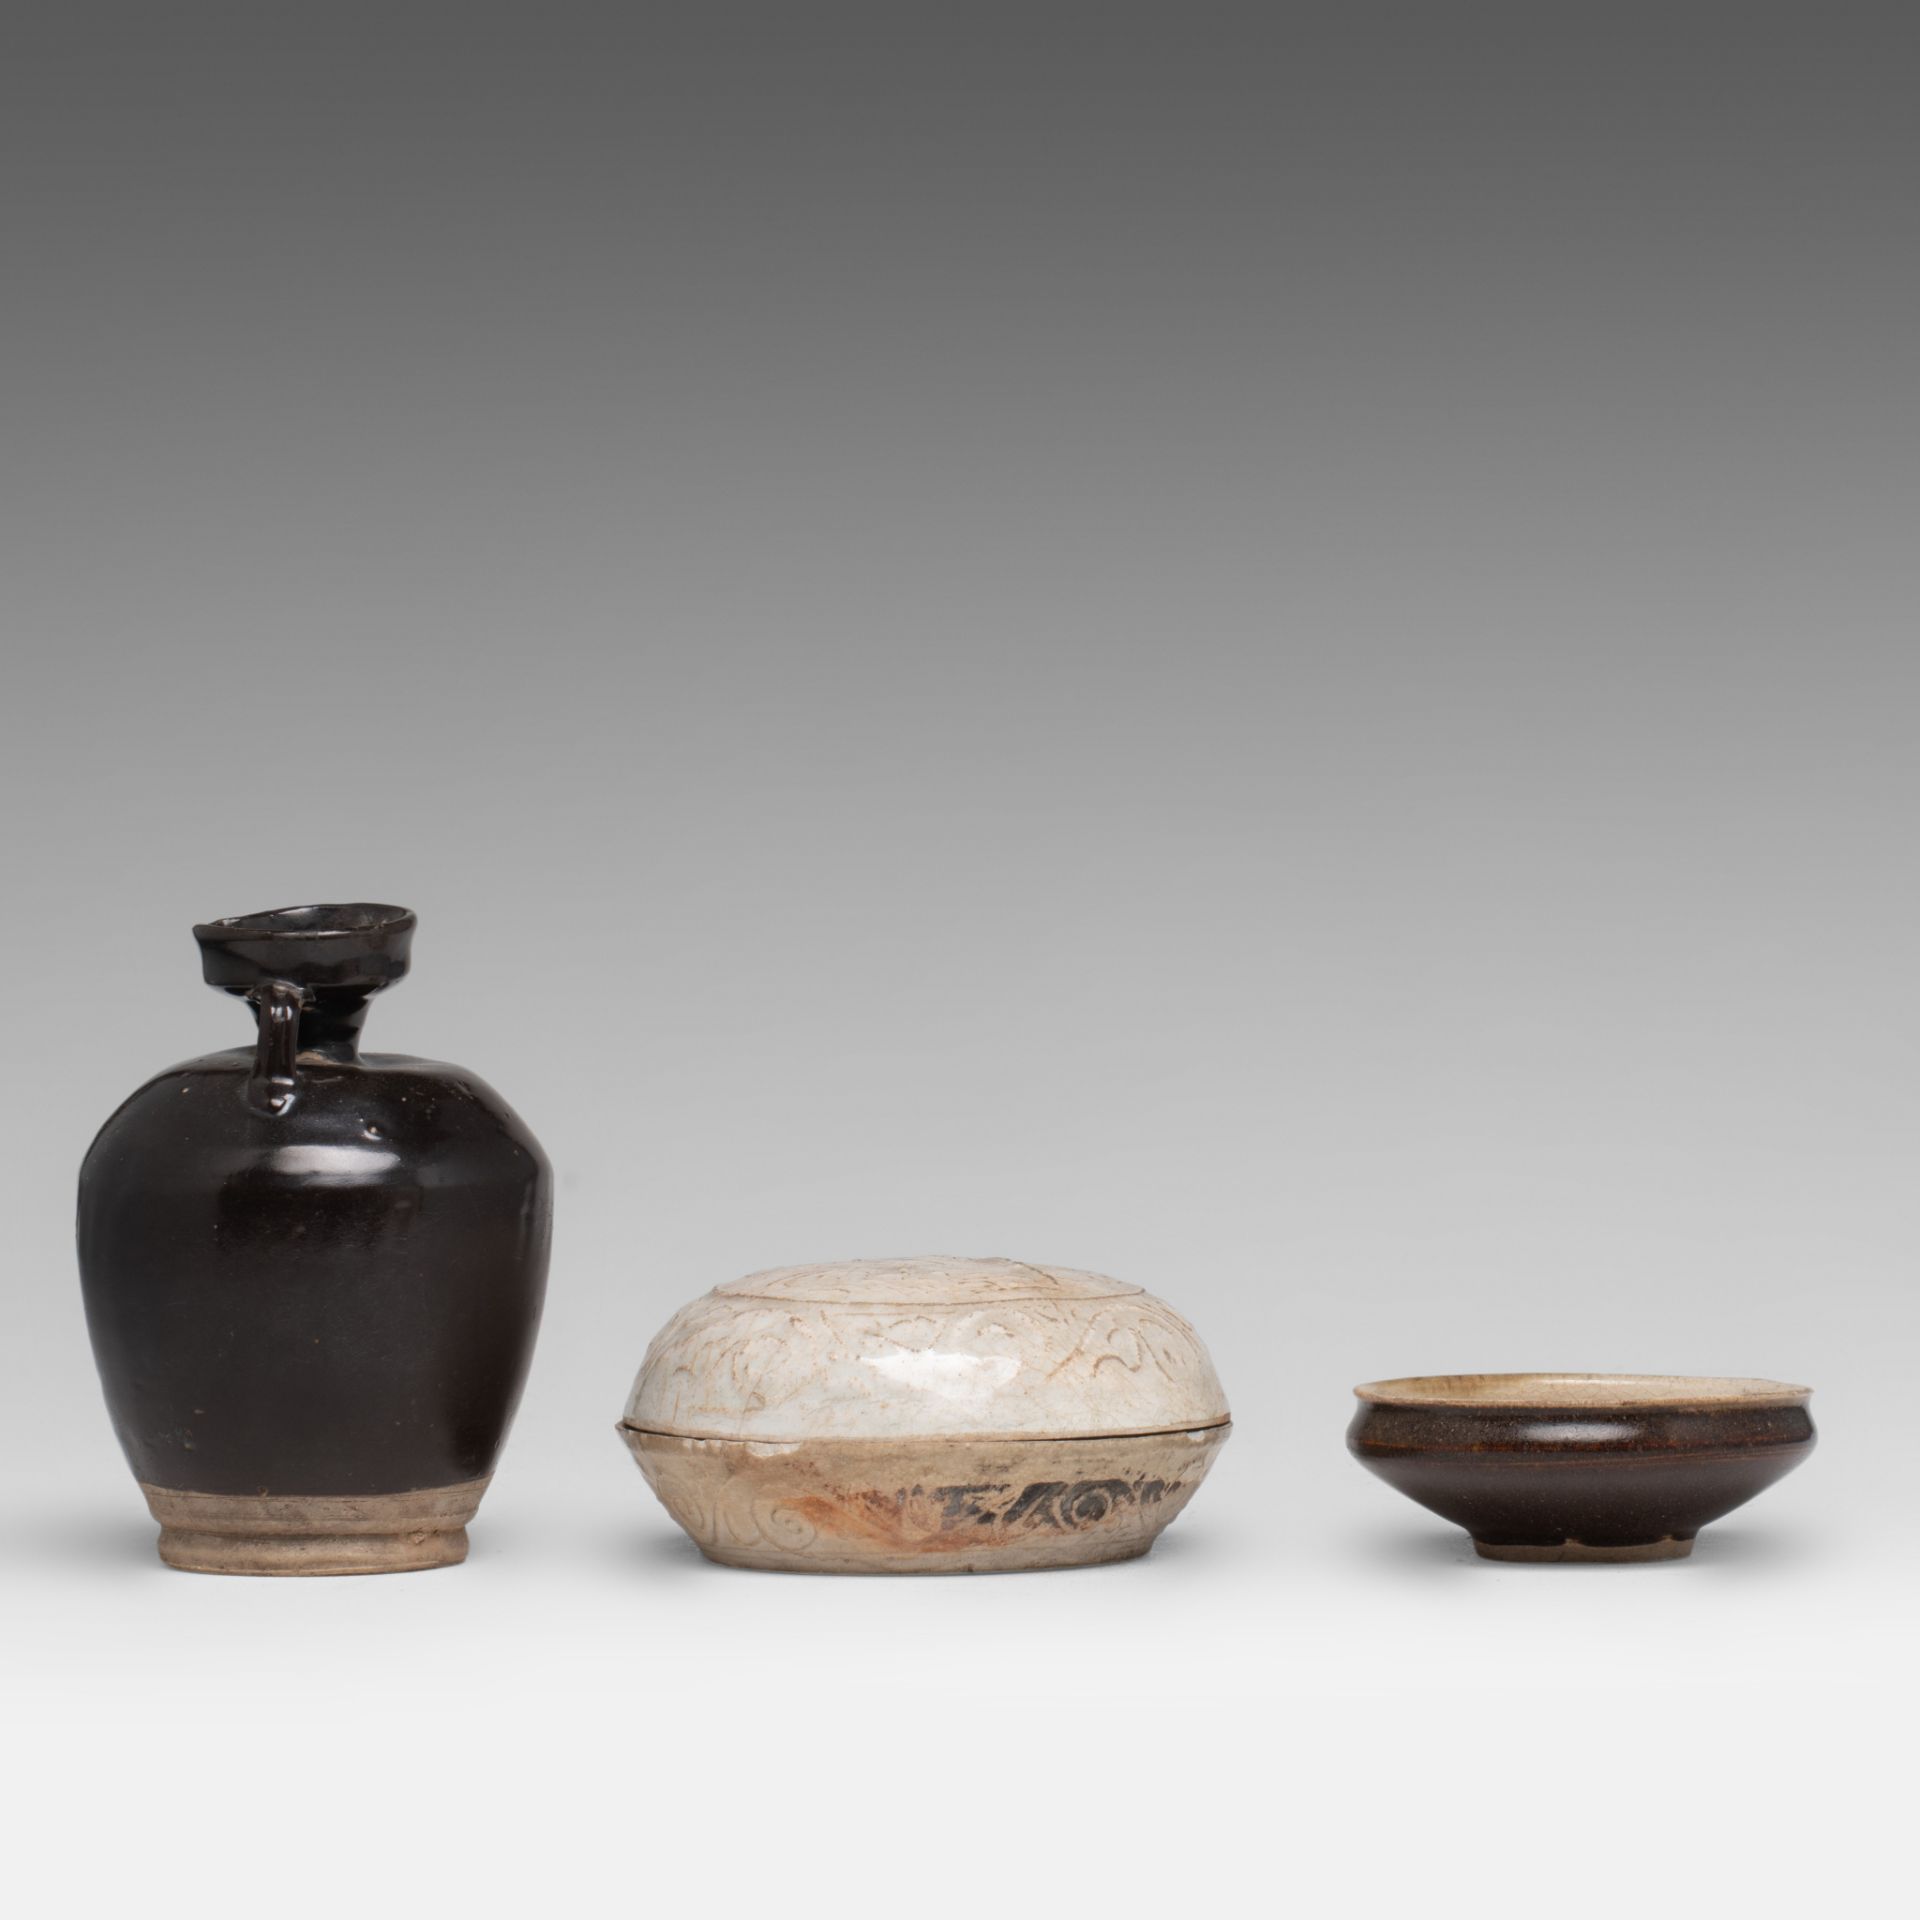 A Chinese black-glazed jar and a uniquely glazed tea bowl, presumably Song, H 15,5 (jar) - dia 10,5 - Image 3 of 7